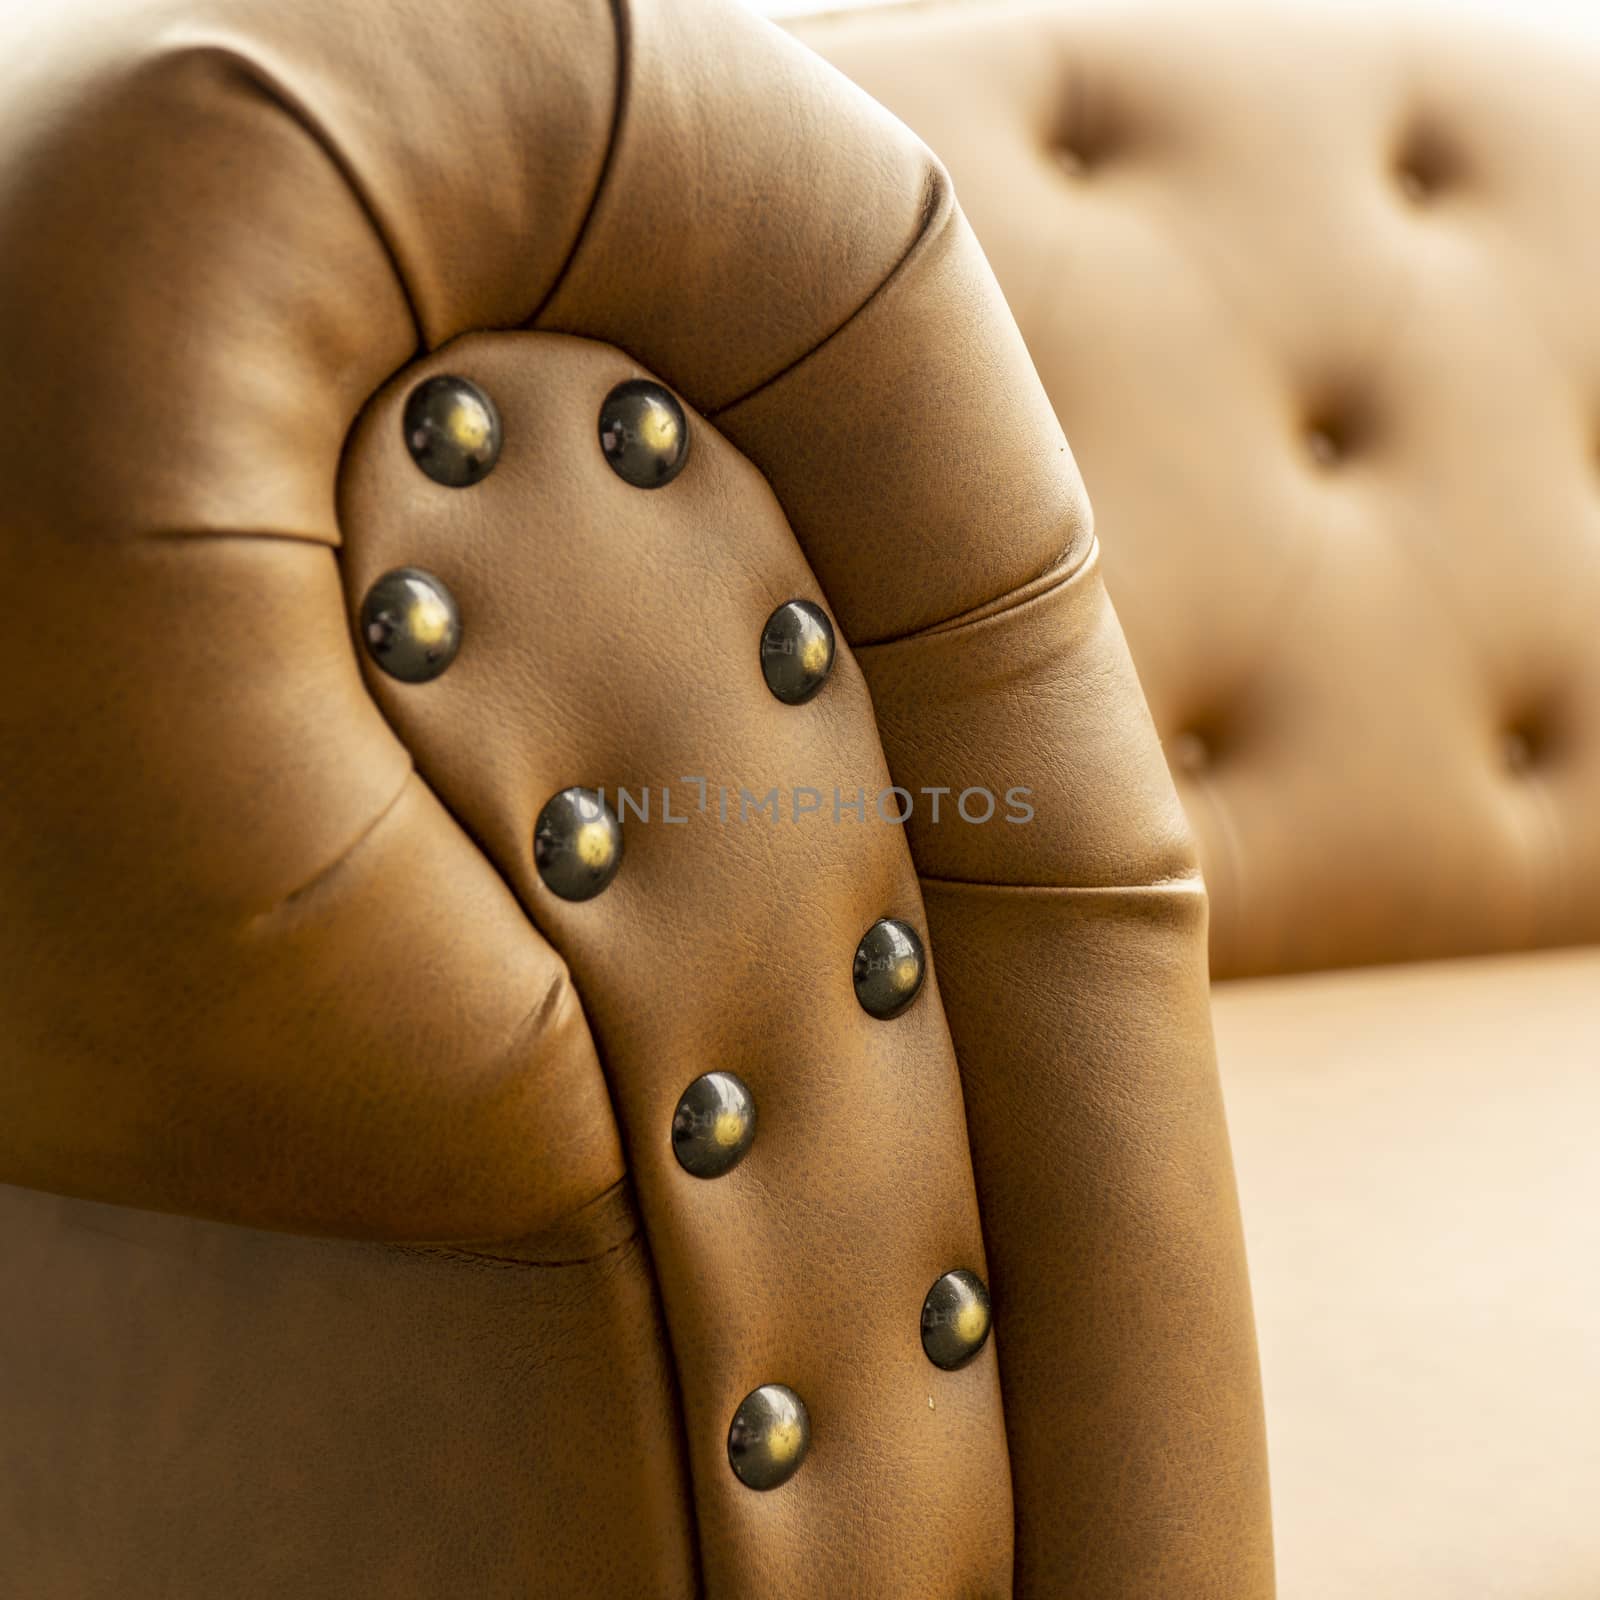 Close up of pins and buttons on a vintage style sofa. Buttoned vintage sofa up close.